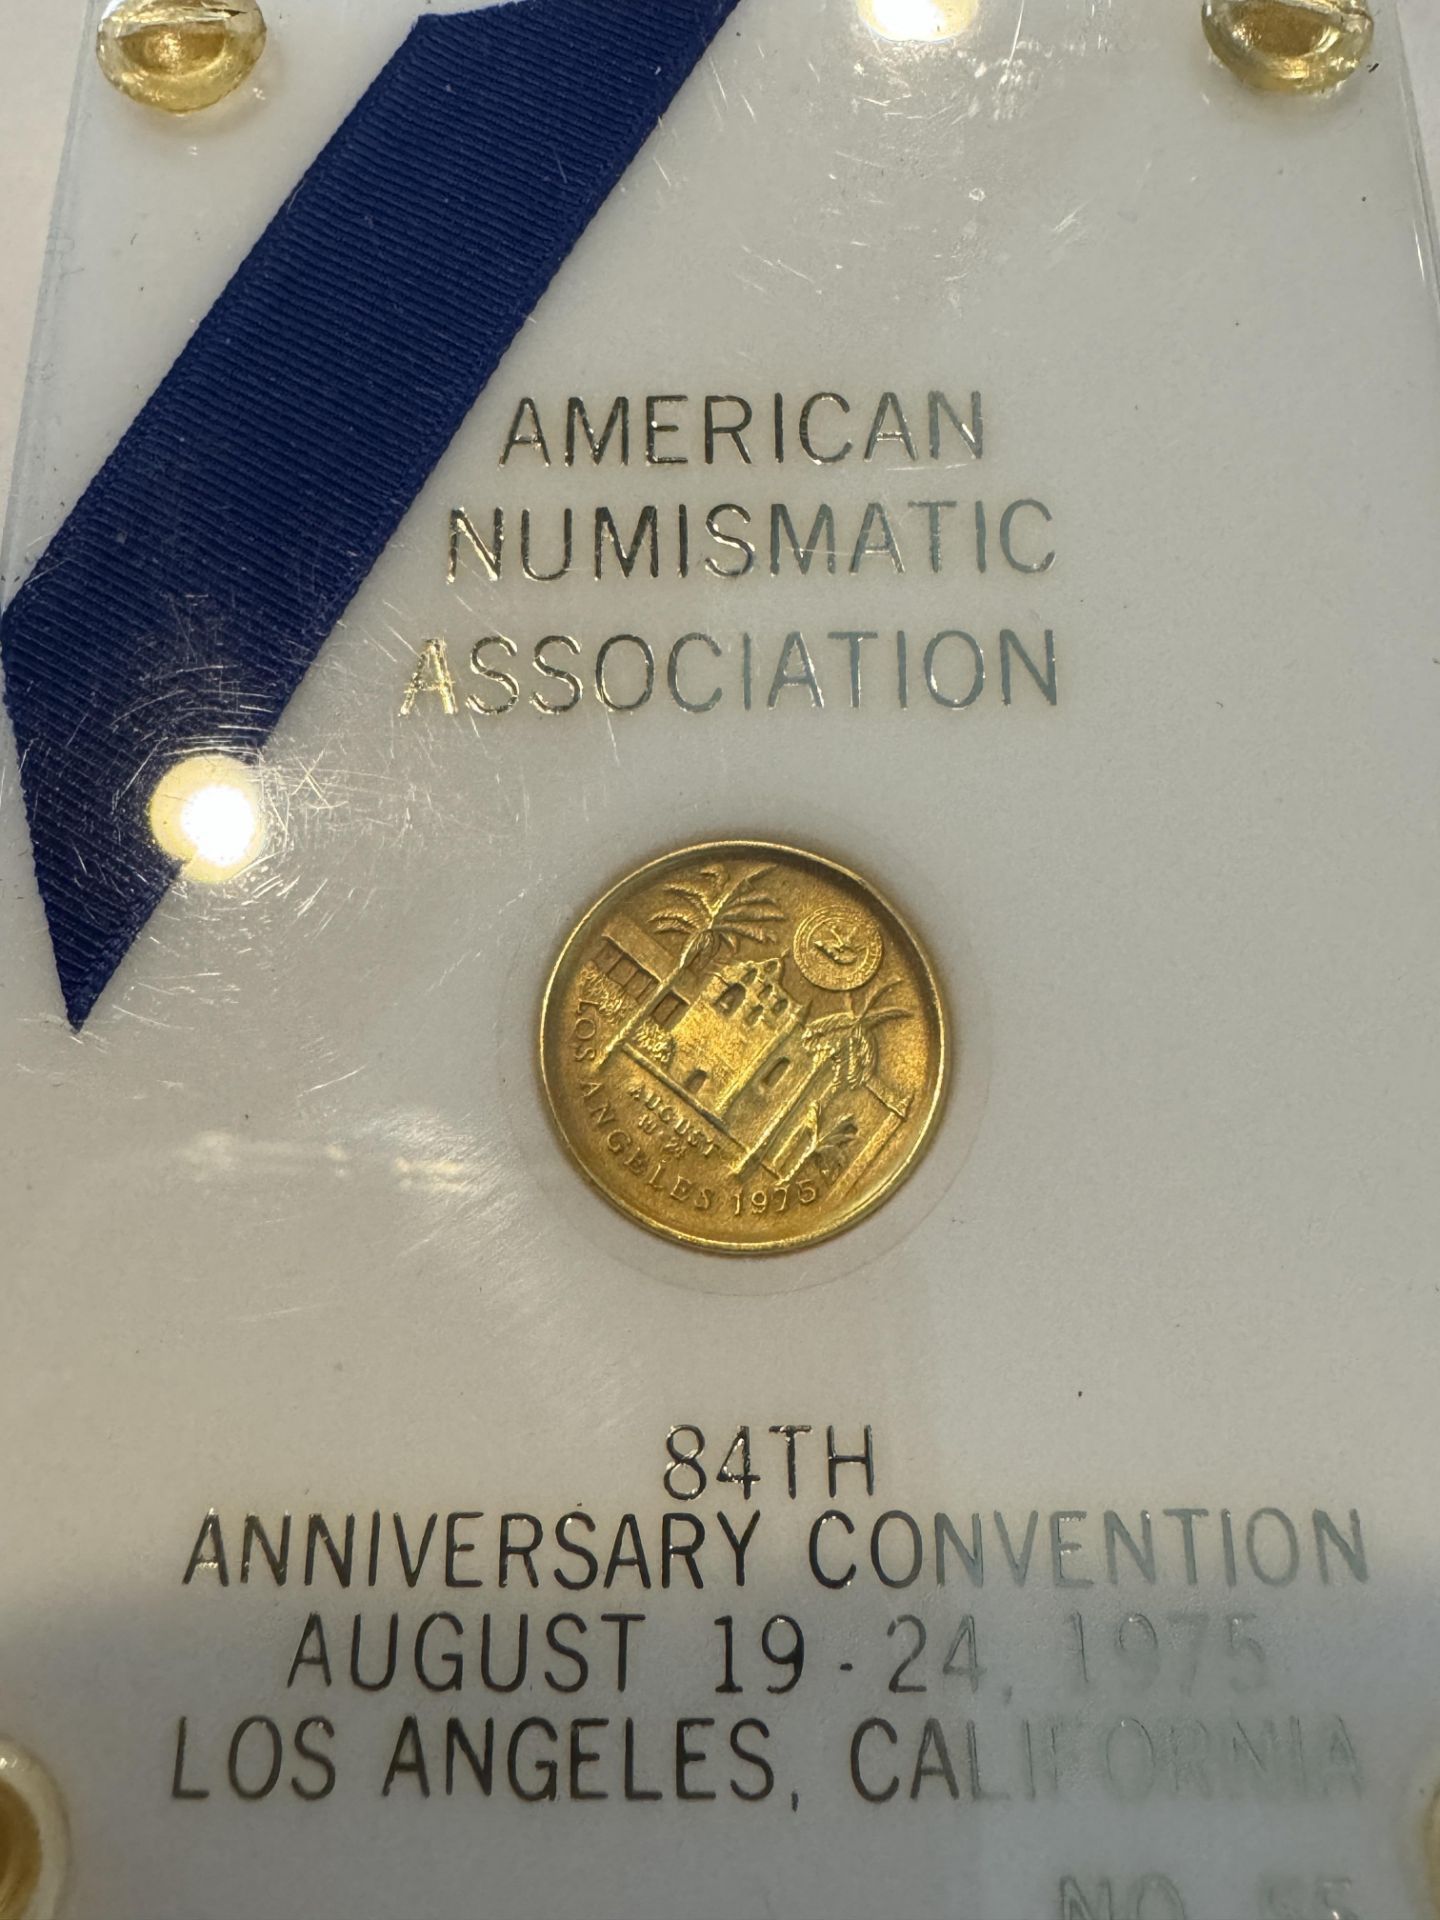 SOLID GOLD COIN OFFICIAL FROM AMERICAN NUMISMATIC ASSOCIATION 84TH ANNIVERSARY - Image 2 of 3